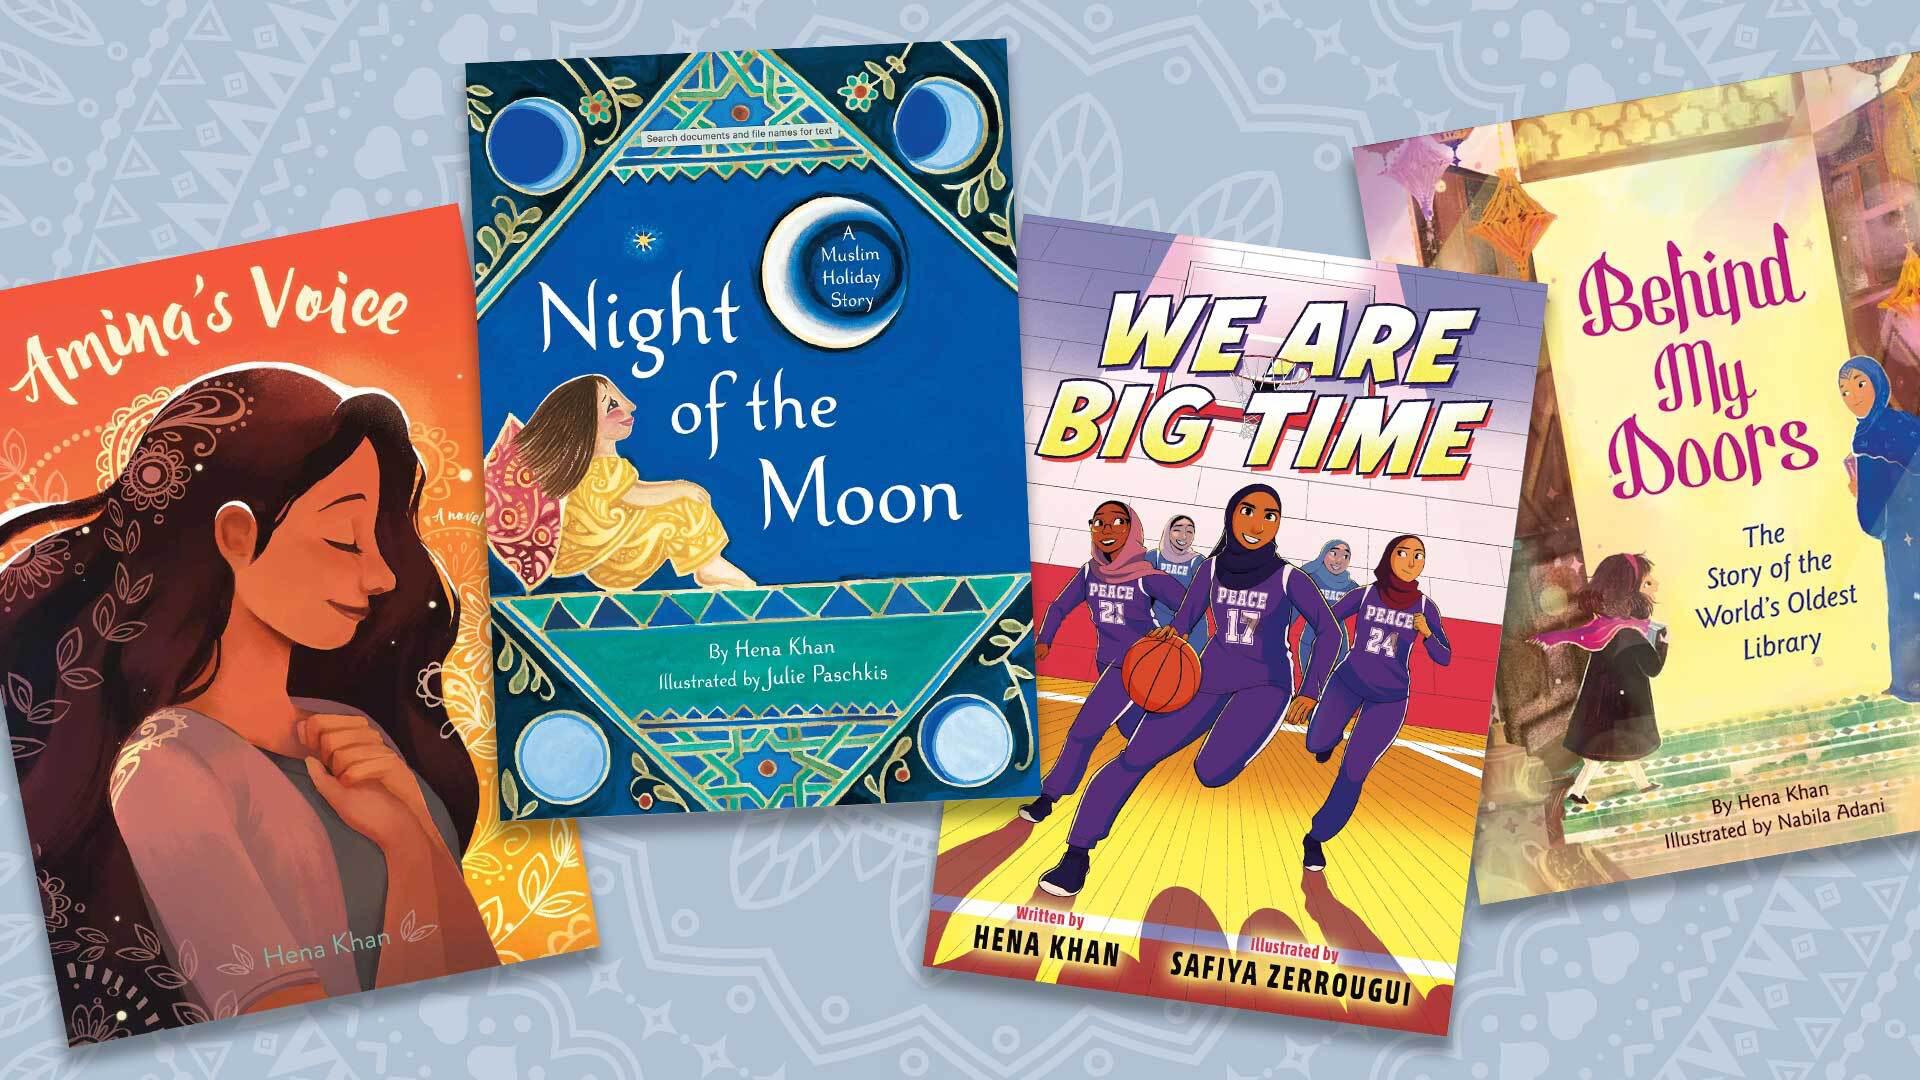 four of Hena Khan's books: Amina's Voice, Night of the Moon, We Are Big Time, Behind My Doors